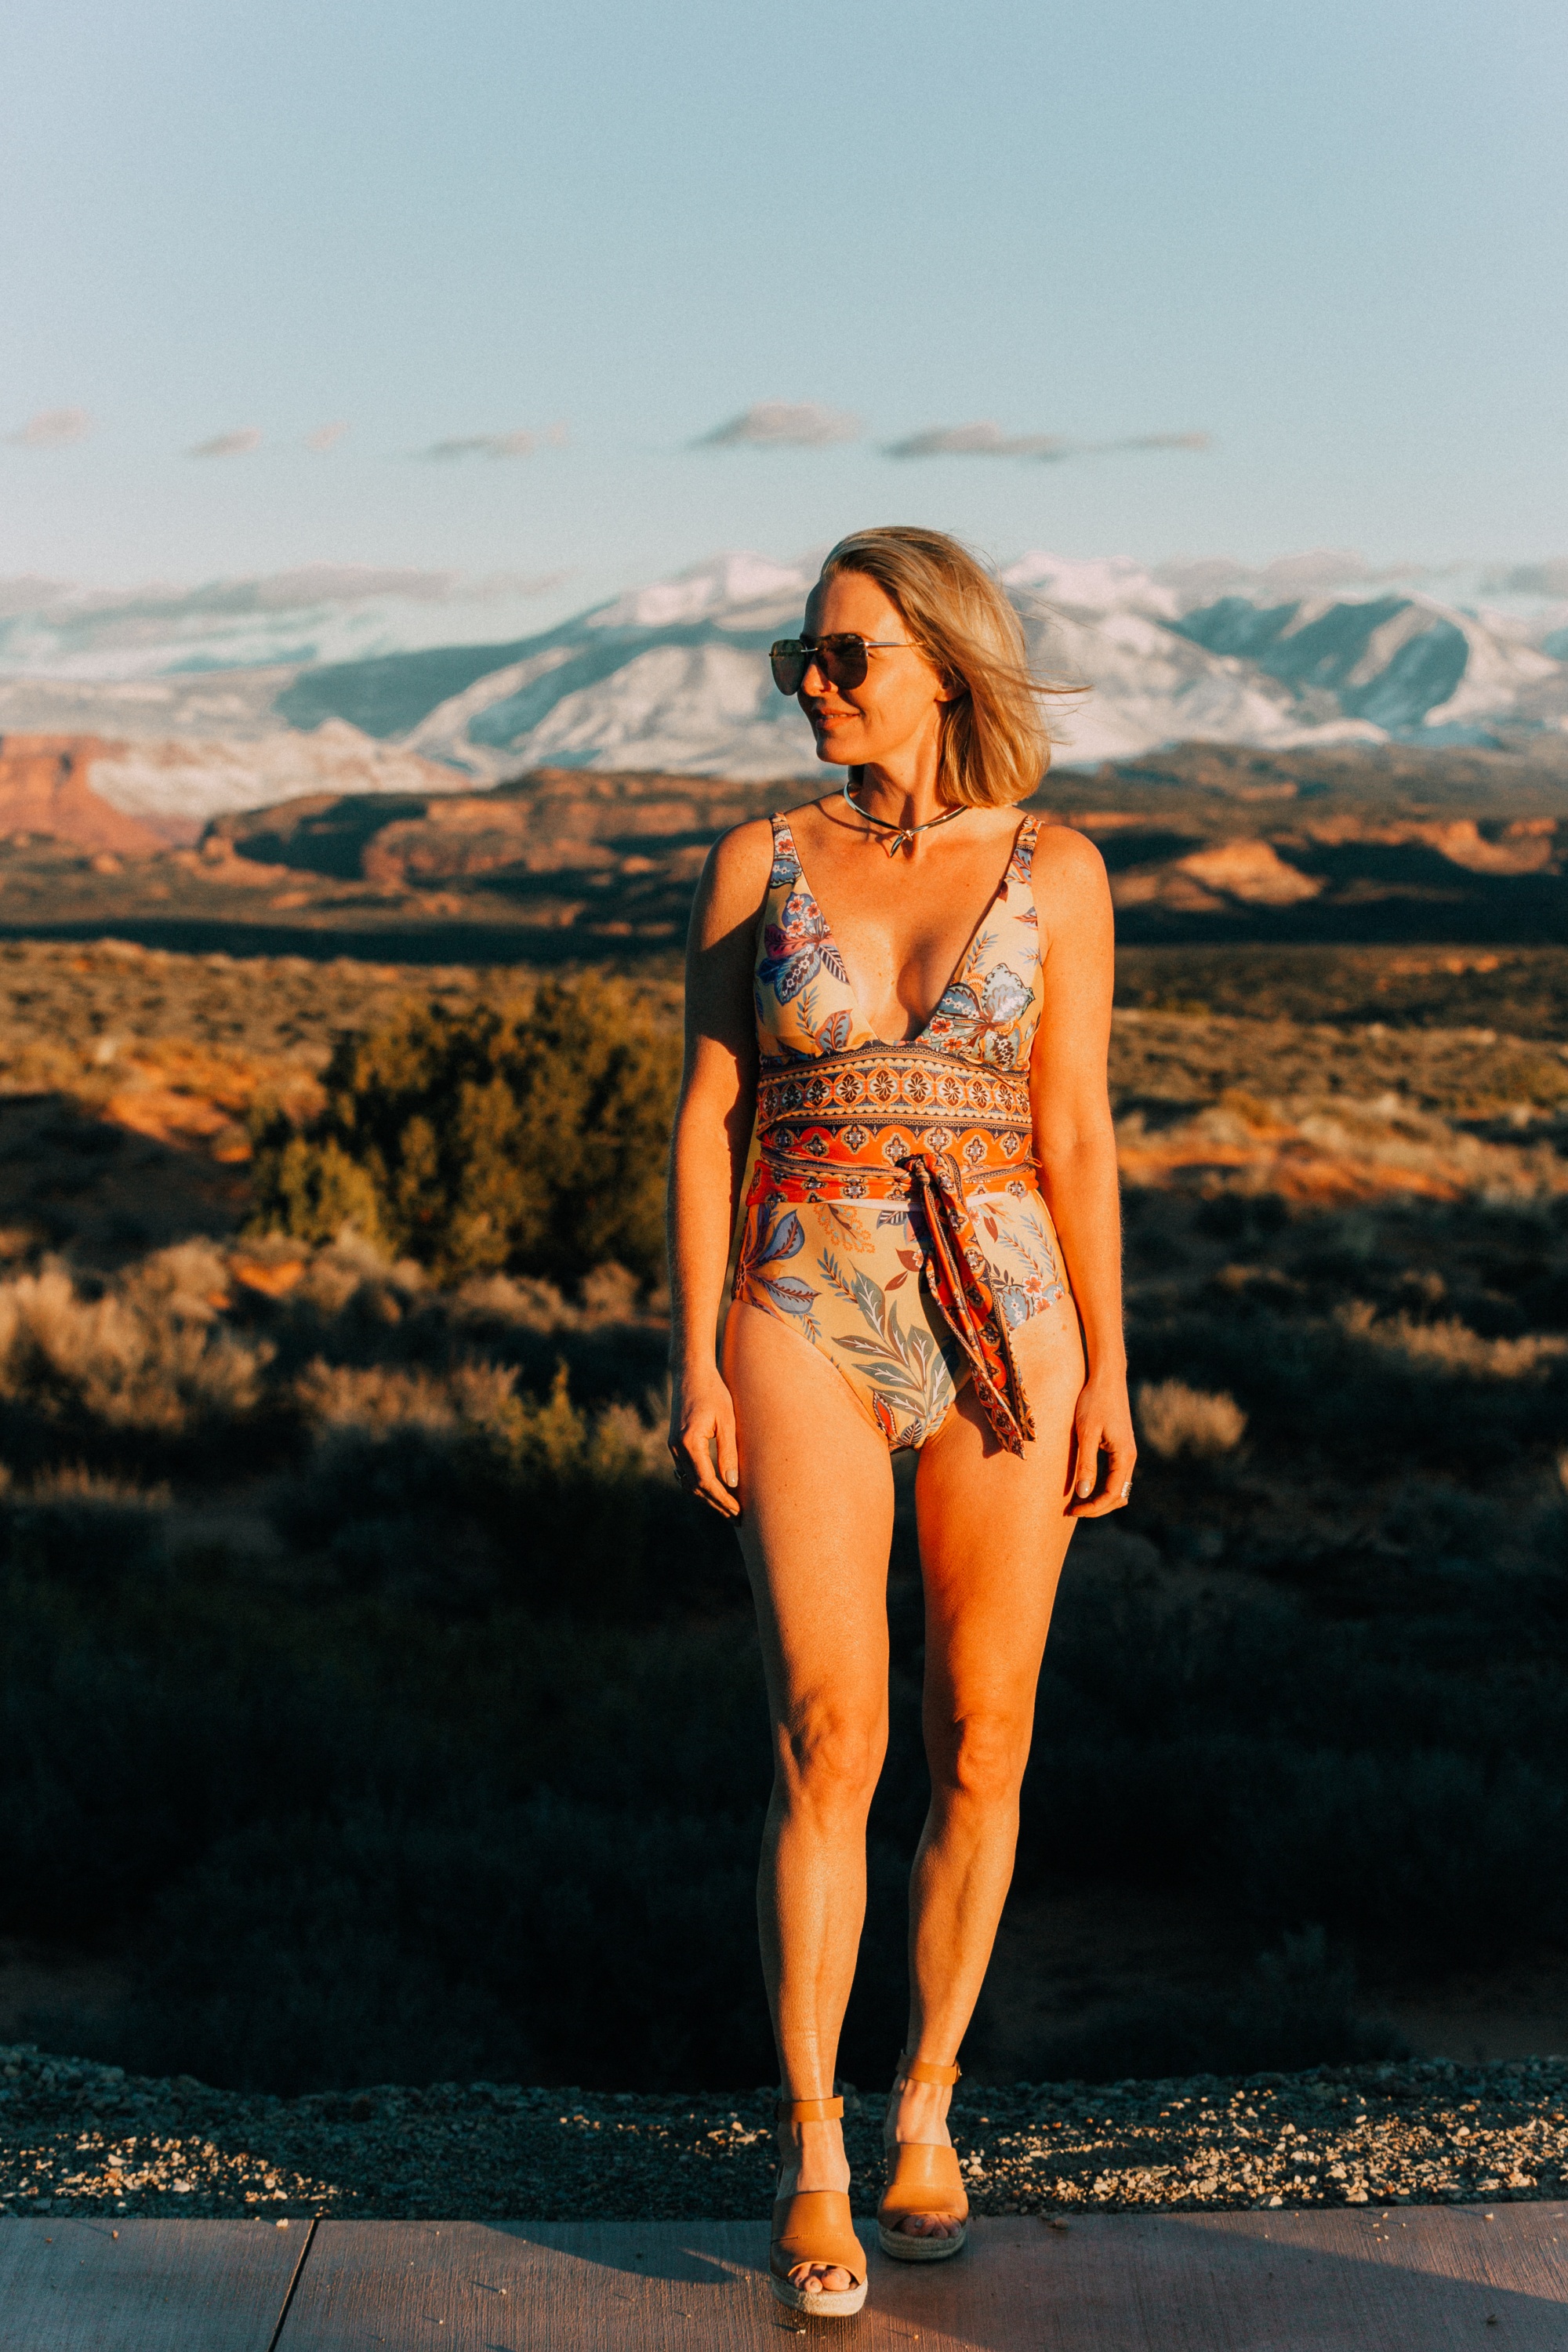 Full Coverage one piece paisley swimsuit by becca for women over 40 years old with Eddie Bargo choker necklace, and Treasure & Bond espadrille sandals in Moab, Utah